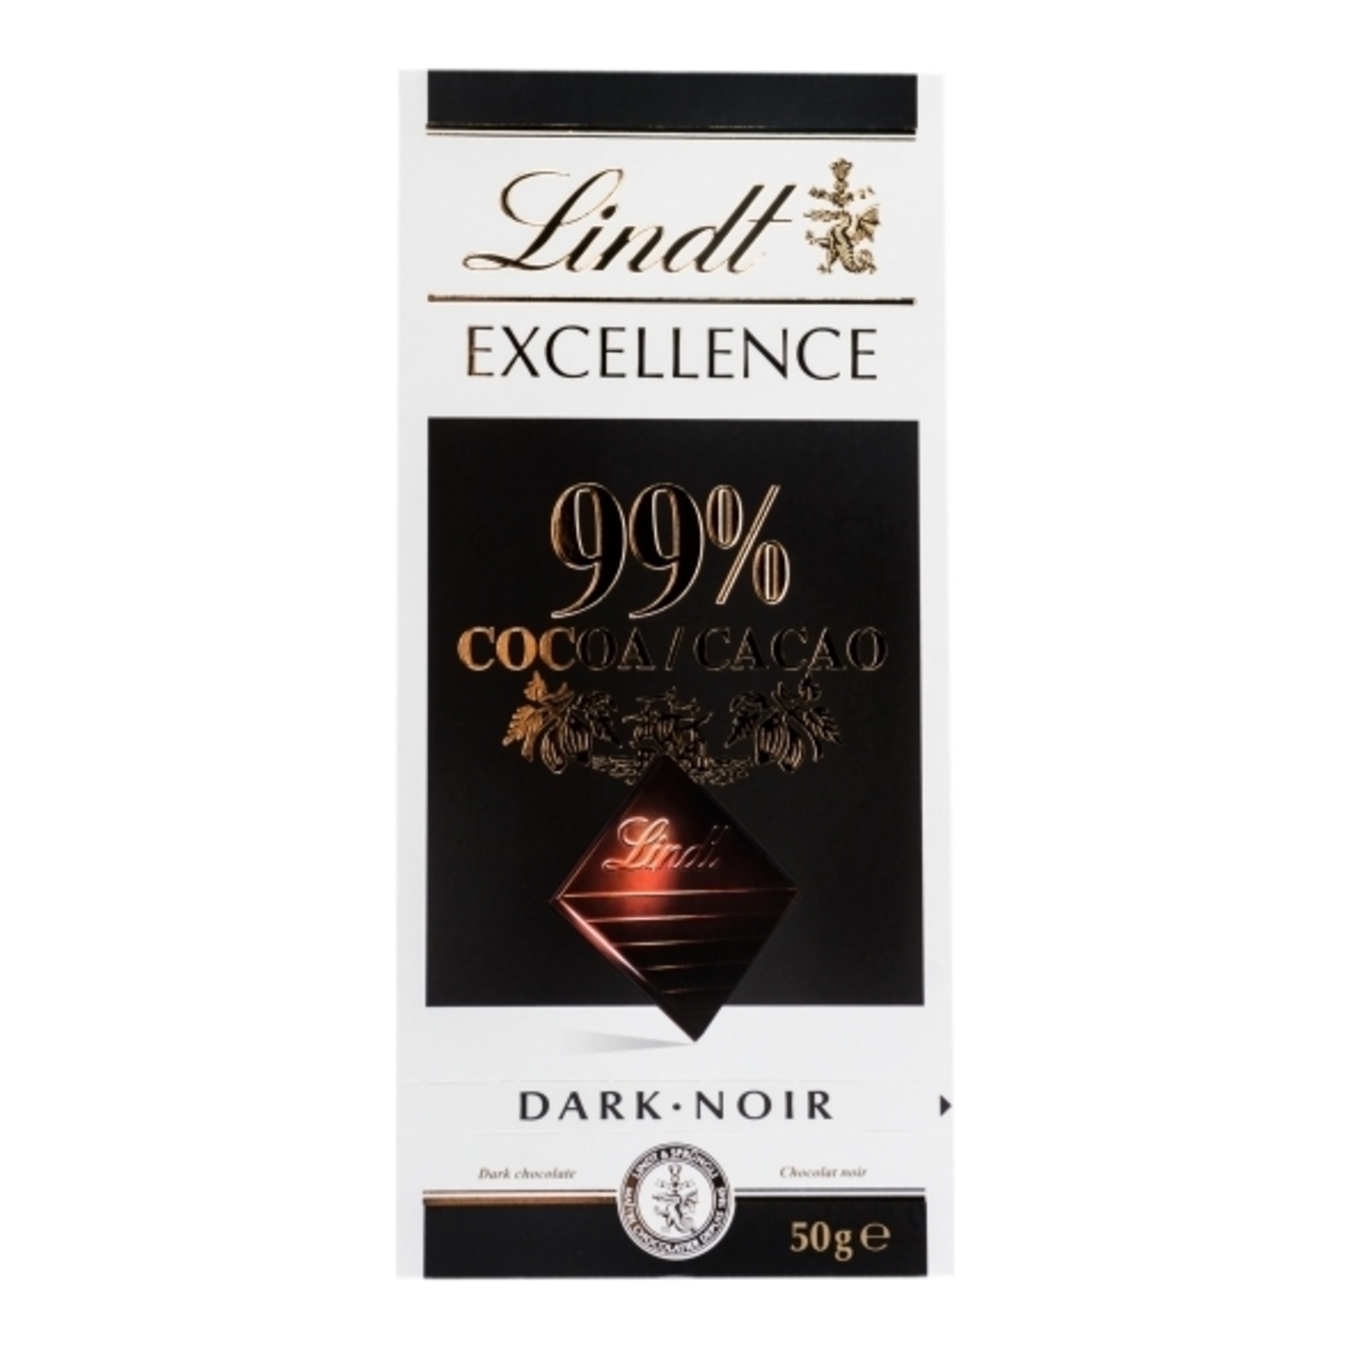 Black Chocolate Lindt Excellence Swiss Bitter in bars 99% 50g